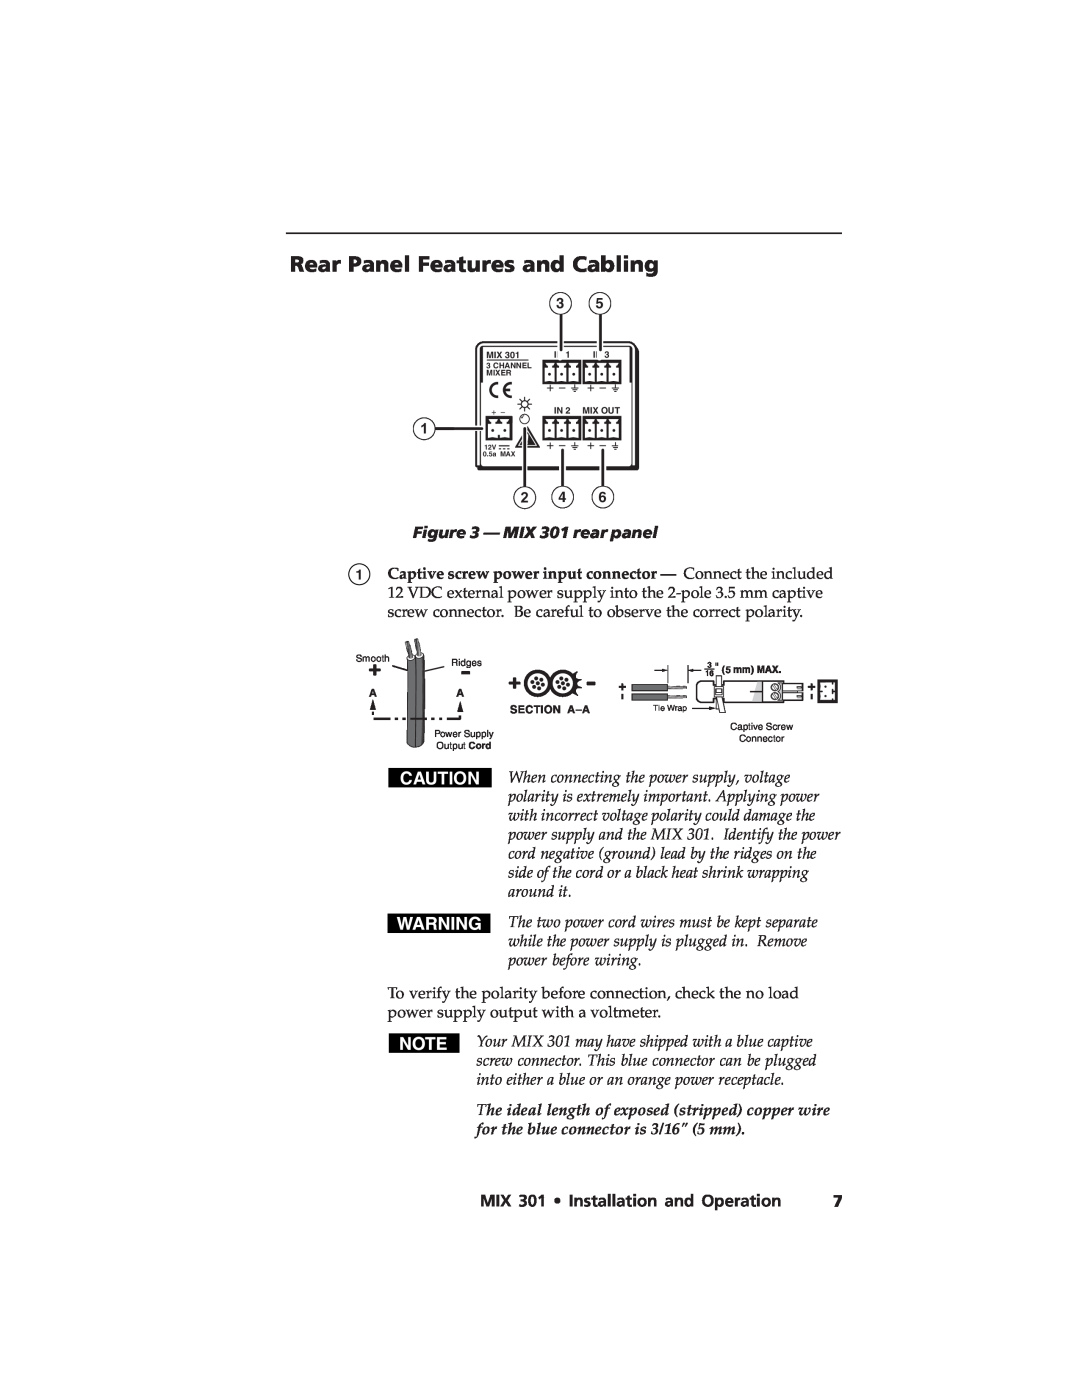 Extron electronic user manual Rear Panel Features and Cabling, MIX 301 rear panel, MIX 301 Installation and Operation 